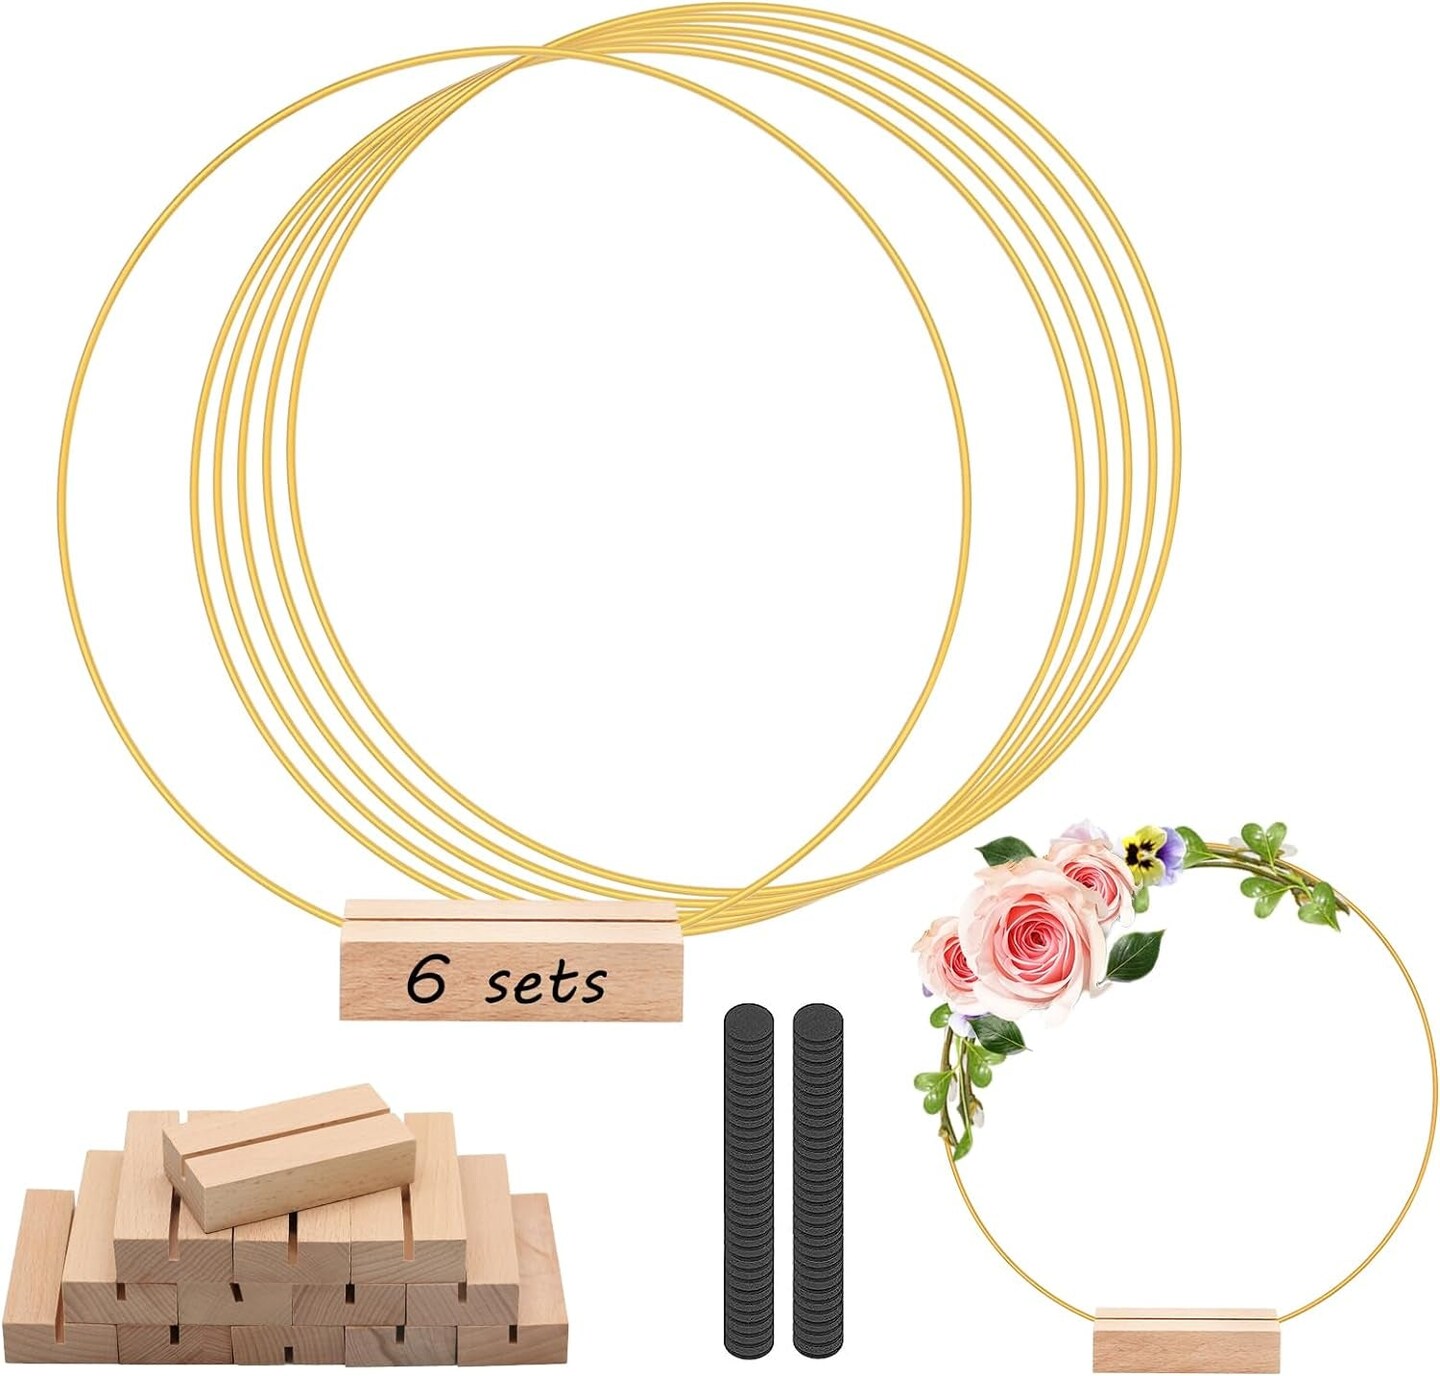 Metal Floral Hoop Centerpiece with Wood Place Card Holders and Adjustable Foot Pads, Gold Wreath Macrame Hoop Rings Decorations for DIY Wedding Party Table Decor Dream Catcher